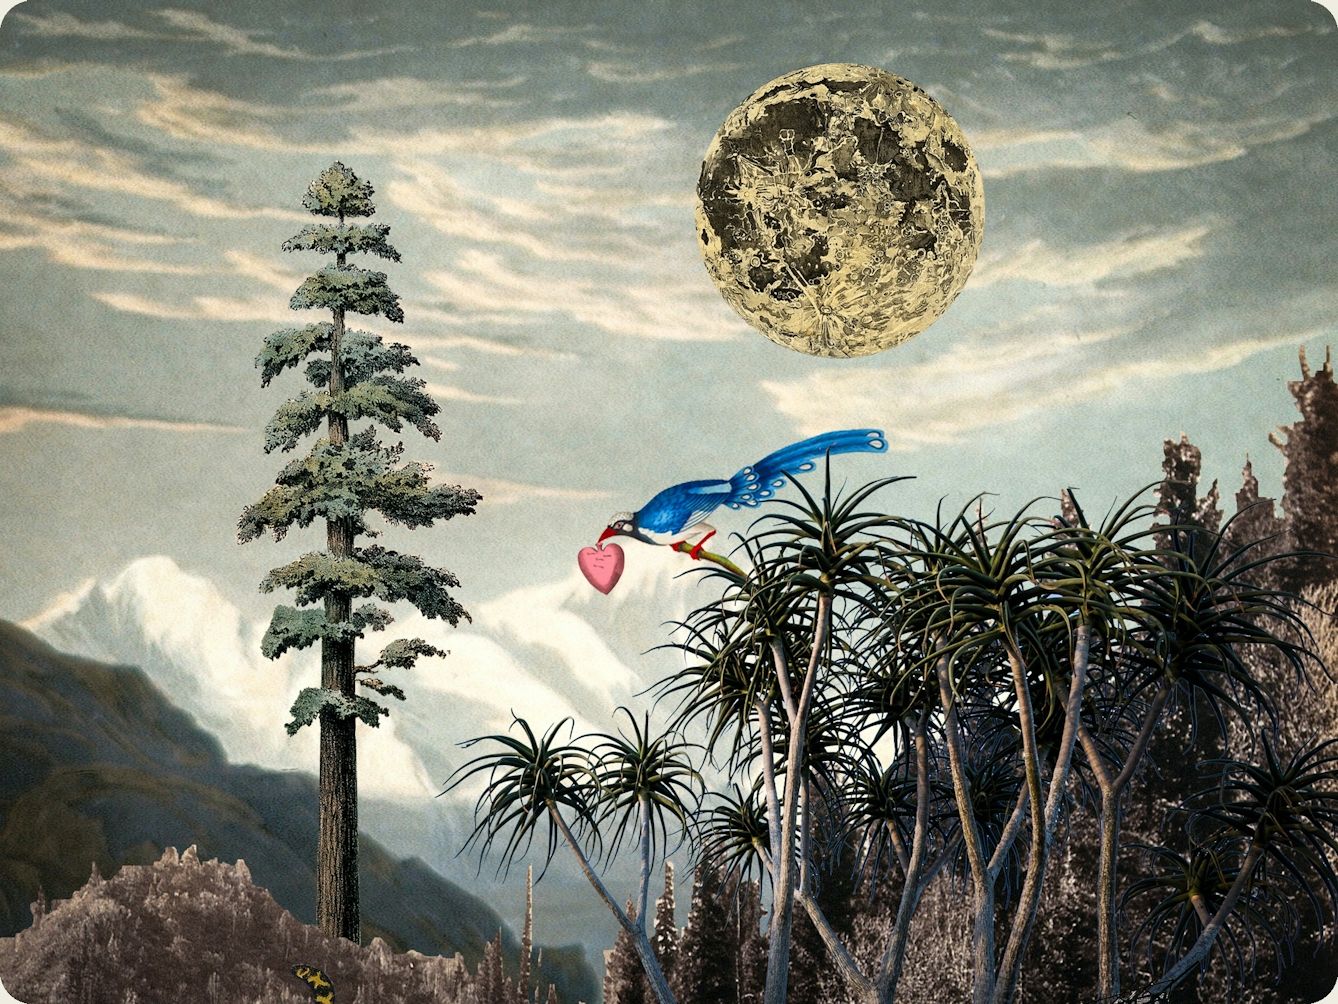 Artwork using collage. The collaged elements are made up of archive material which includes vintage and contemporary photographs, etchings, painted illustrations, lithographic prints and line drawings. This artwork depicts a scene with an urban and rural combined background, where high mountains and hills rise in the distance. In the middle distance are a series of tall trees. In the cloud scattered sky above is a large moon like orb. A blue bird sits in a high tree on the right, a pink heart shape in its mouth.